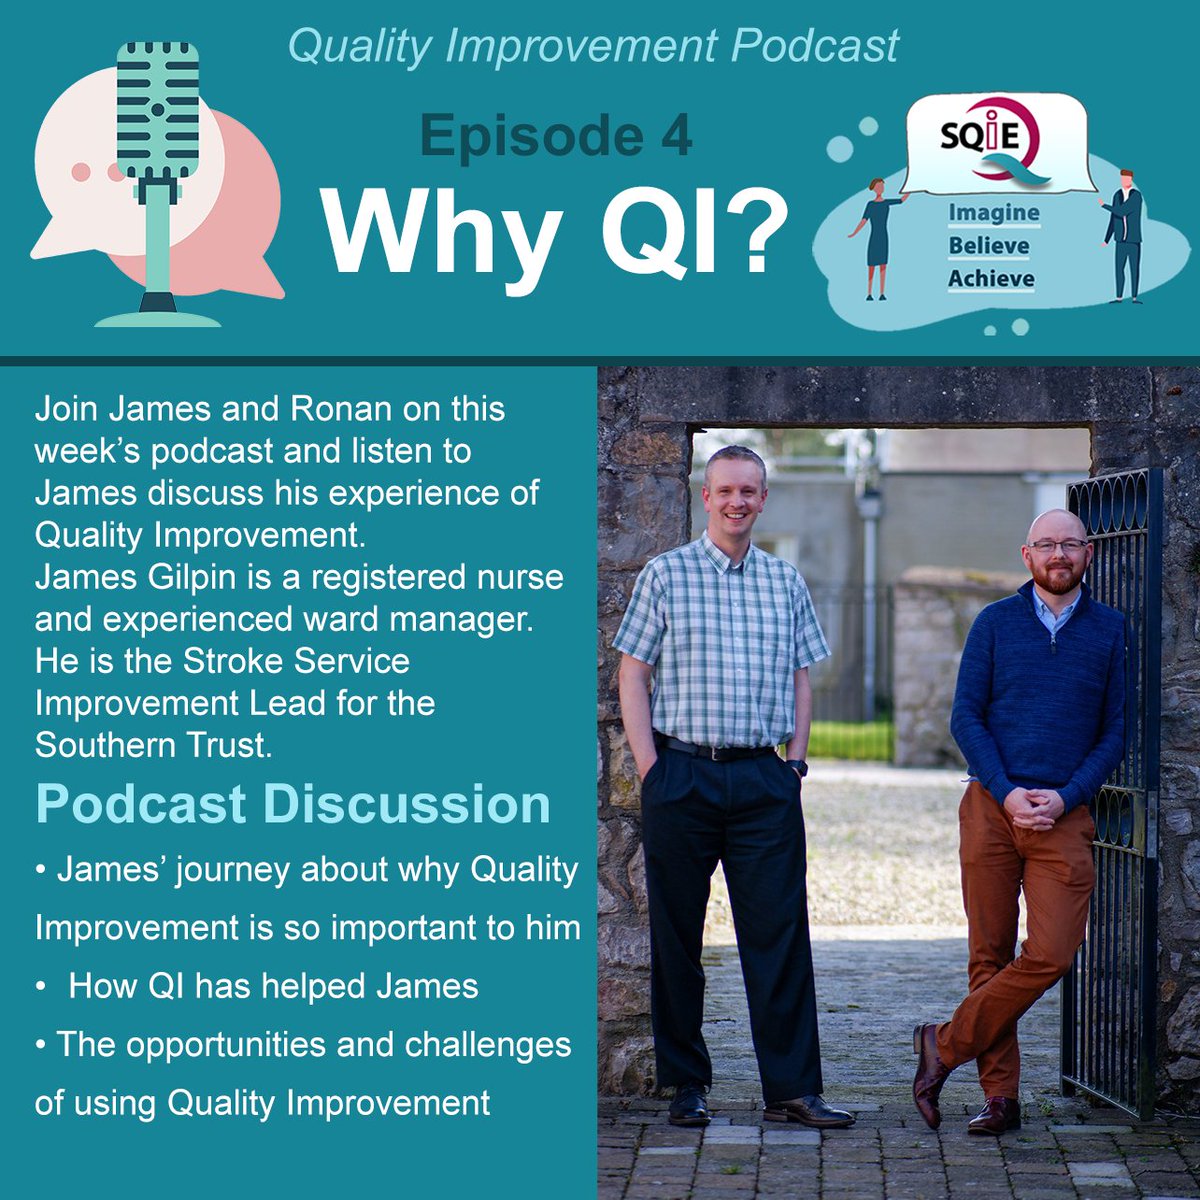 *STAFF POST* The final podcast in our series for Quality Improvement Month, our QI colleague Ronan discusses quality improvement with James, a registered nurse and ward manager, who is the Stroke Service Improvement Lead for the Southern Trust. 🎧bit.ly/3OcXUcw #SQiE